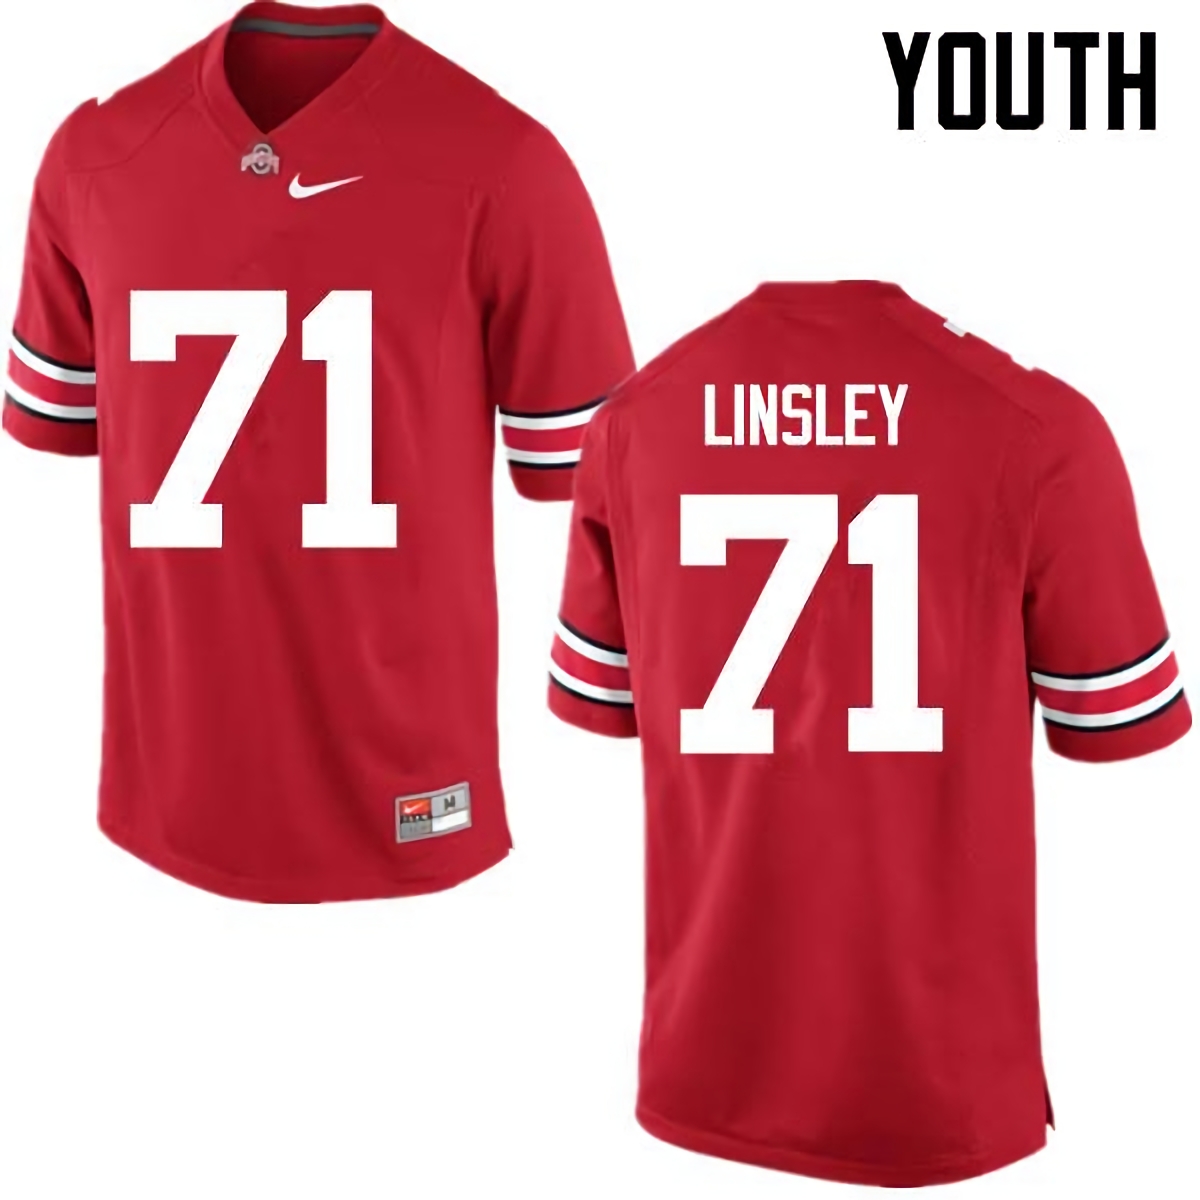 Corey Linsley Ohio State Buckeyes Youth NCAA #71 Nike Red College Stitched Football Jersey LFM0356RP